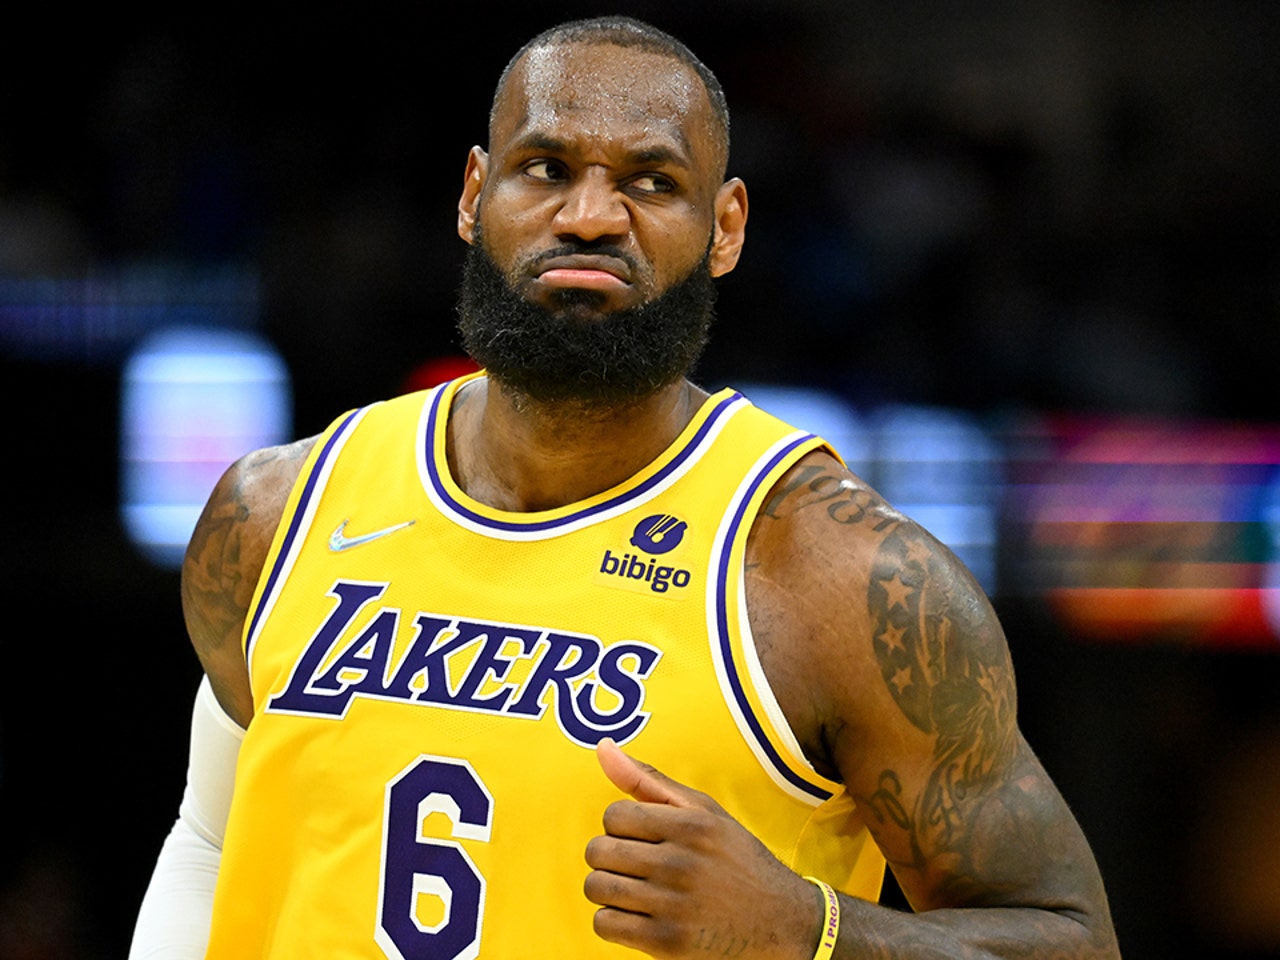 LeBron James ranks 6th in latest NBA player ranking, UNDISPUTED